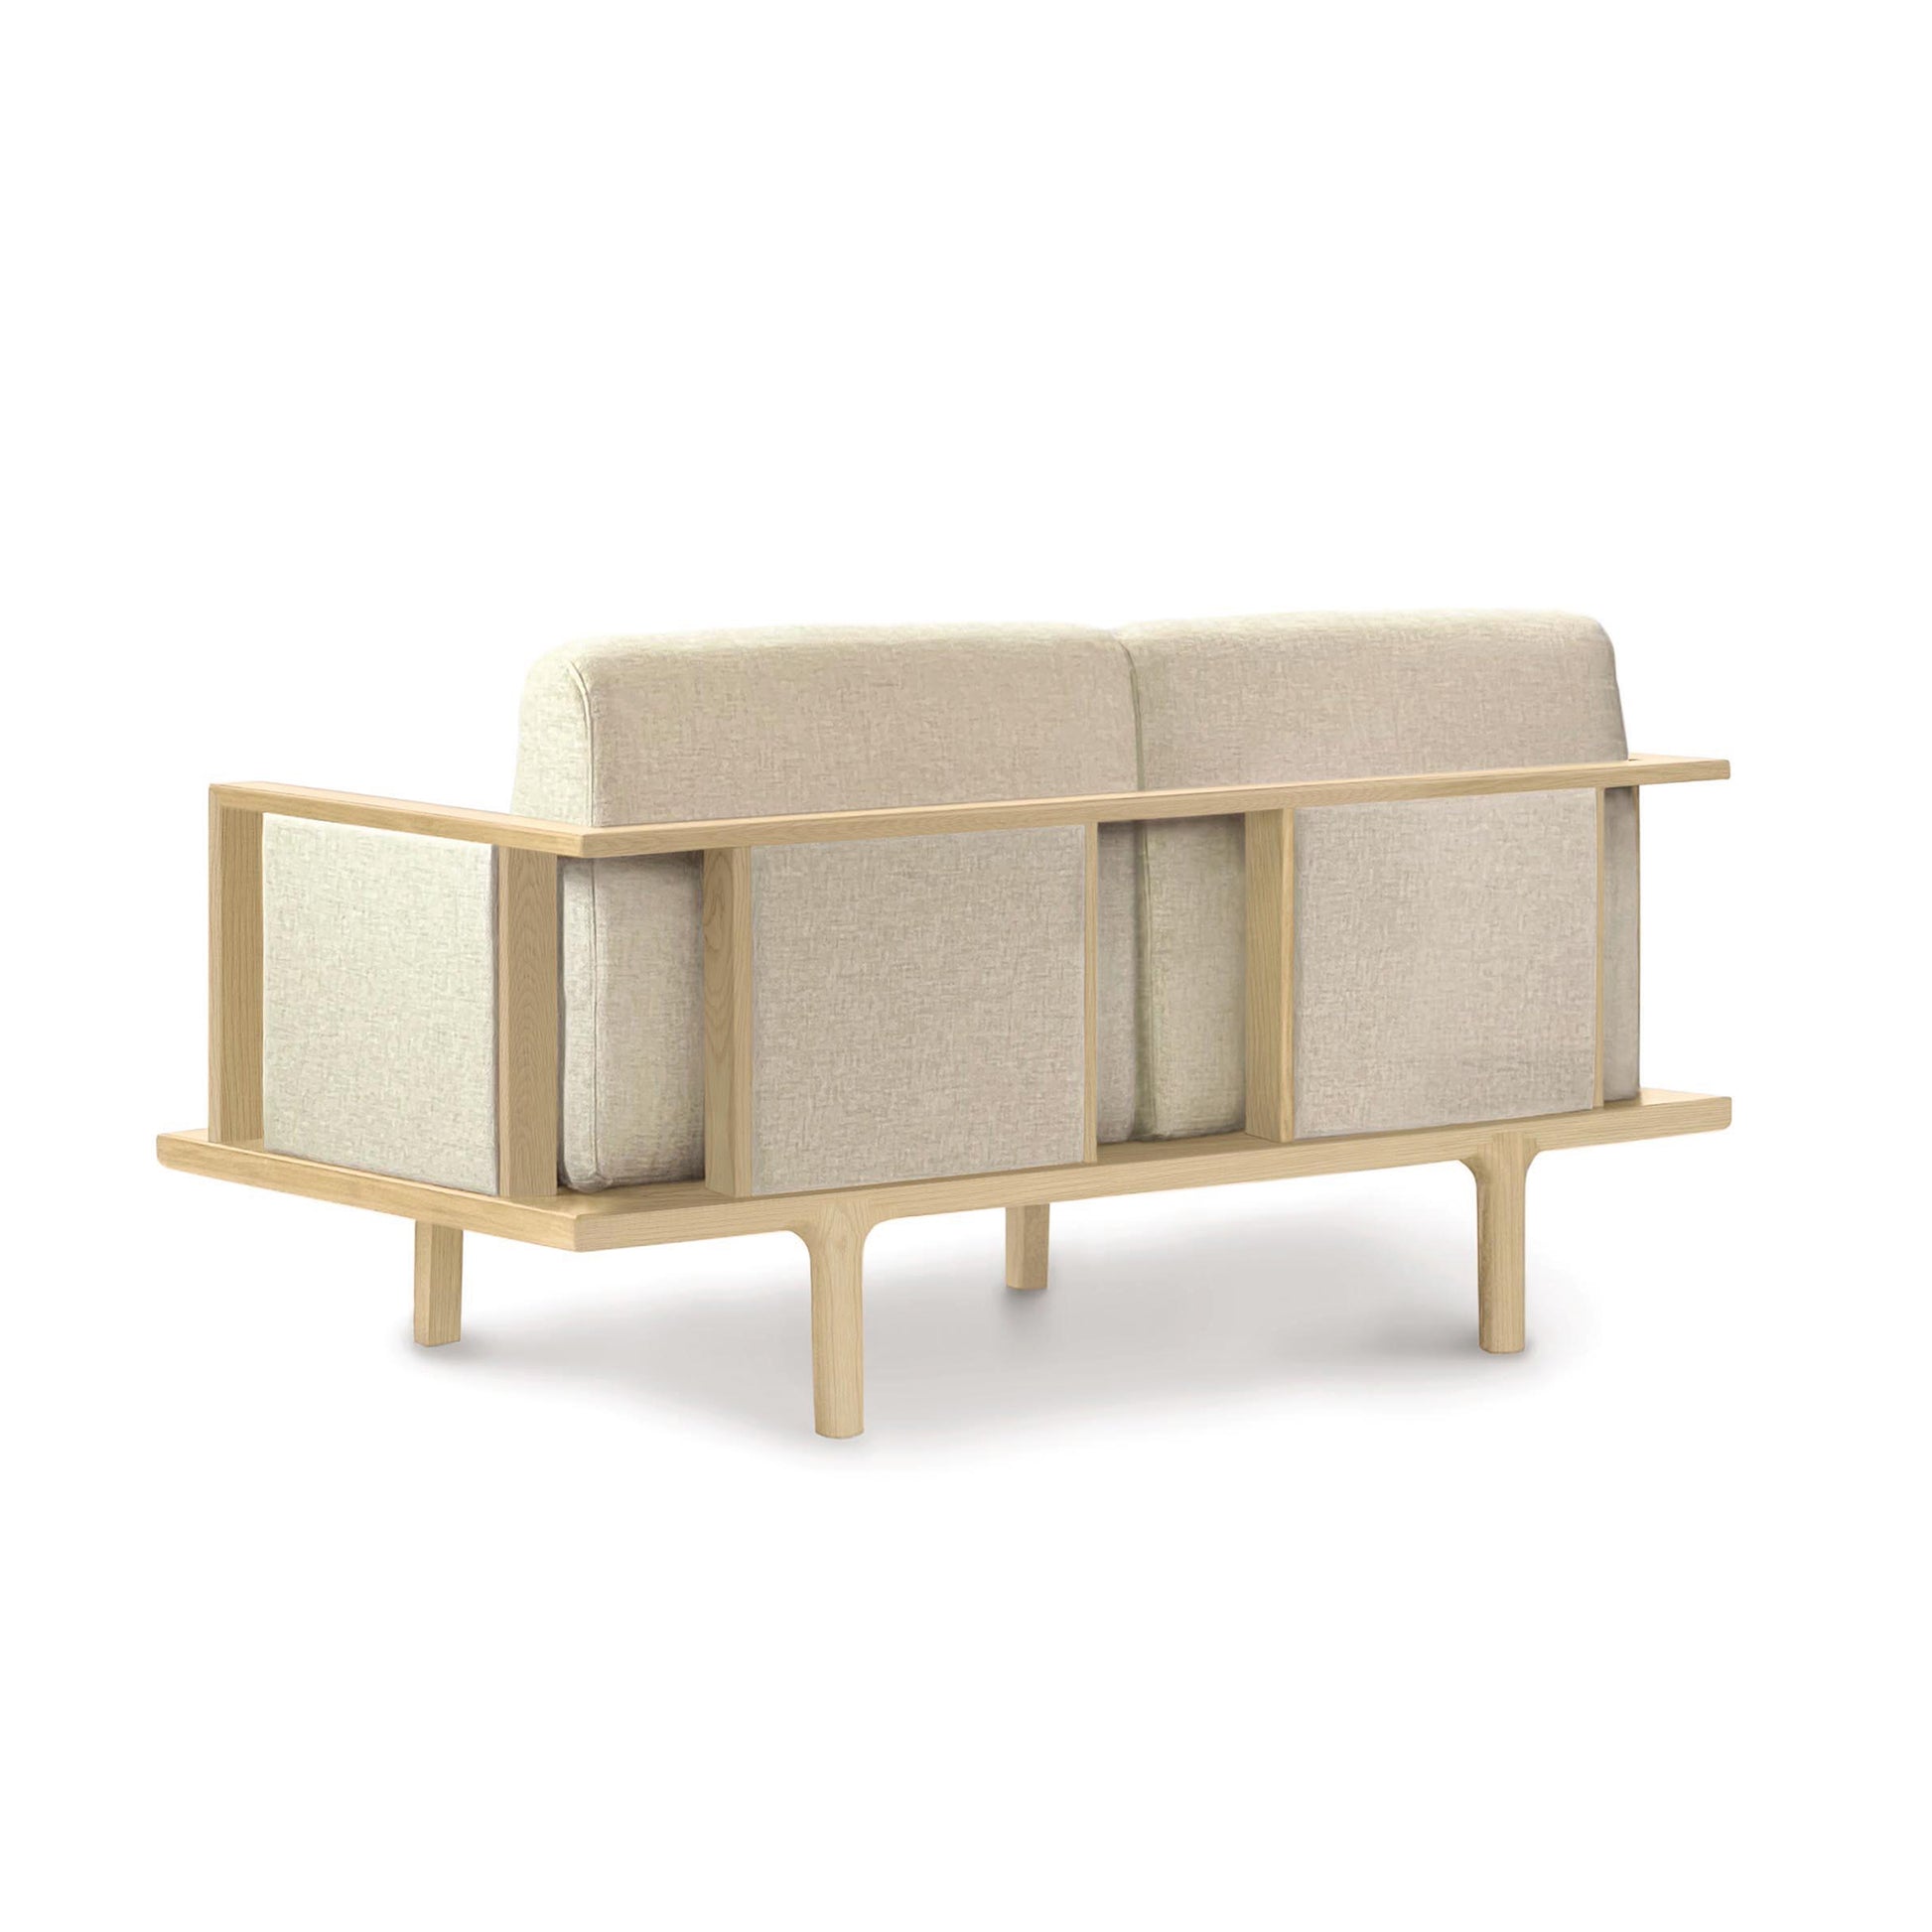 A contemporary Sierra Oak Upholstered Loveseat with Upholstered Panels from Copeland Furniture, with wooden armrests.